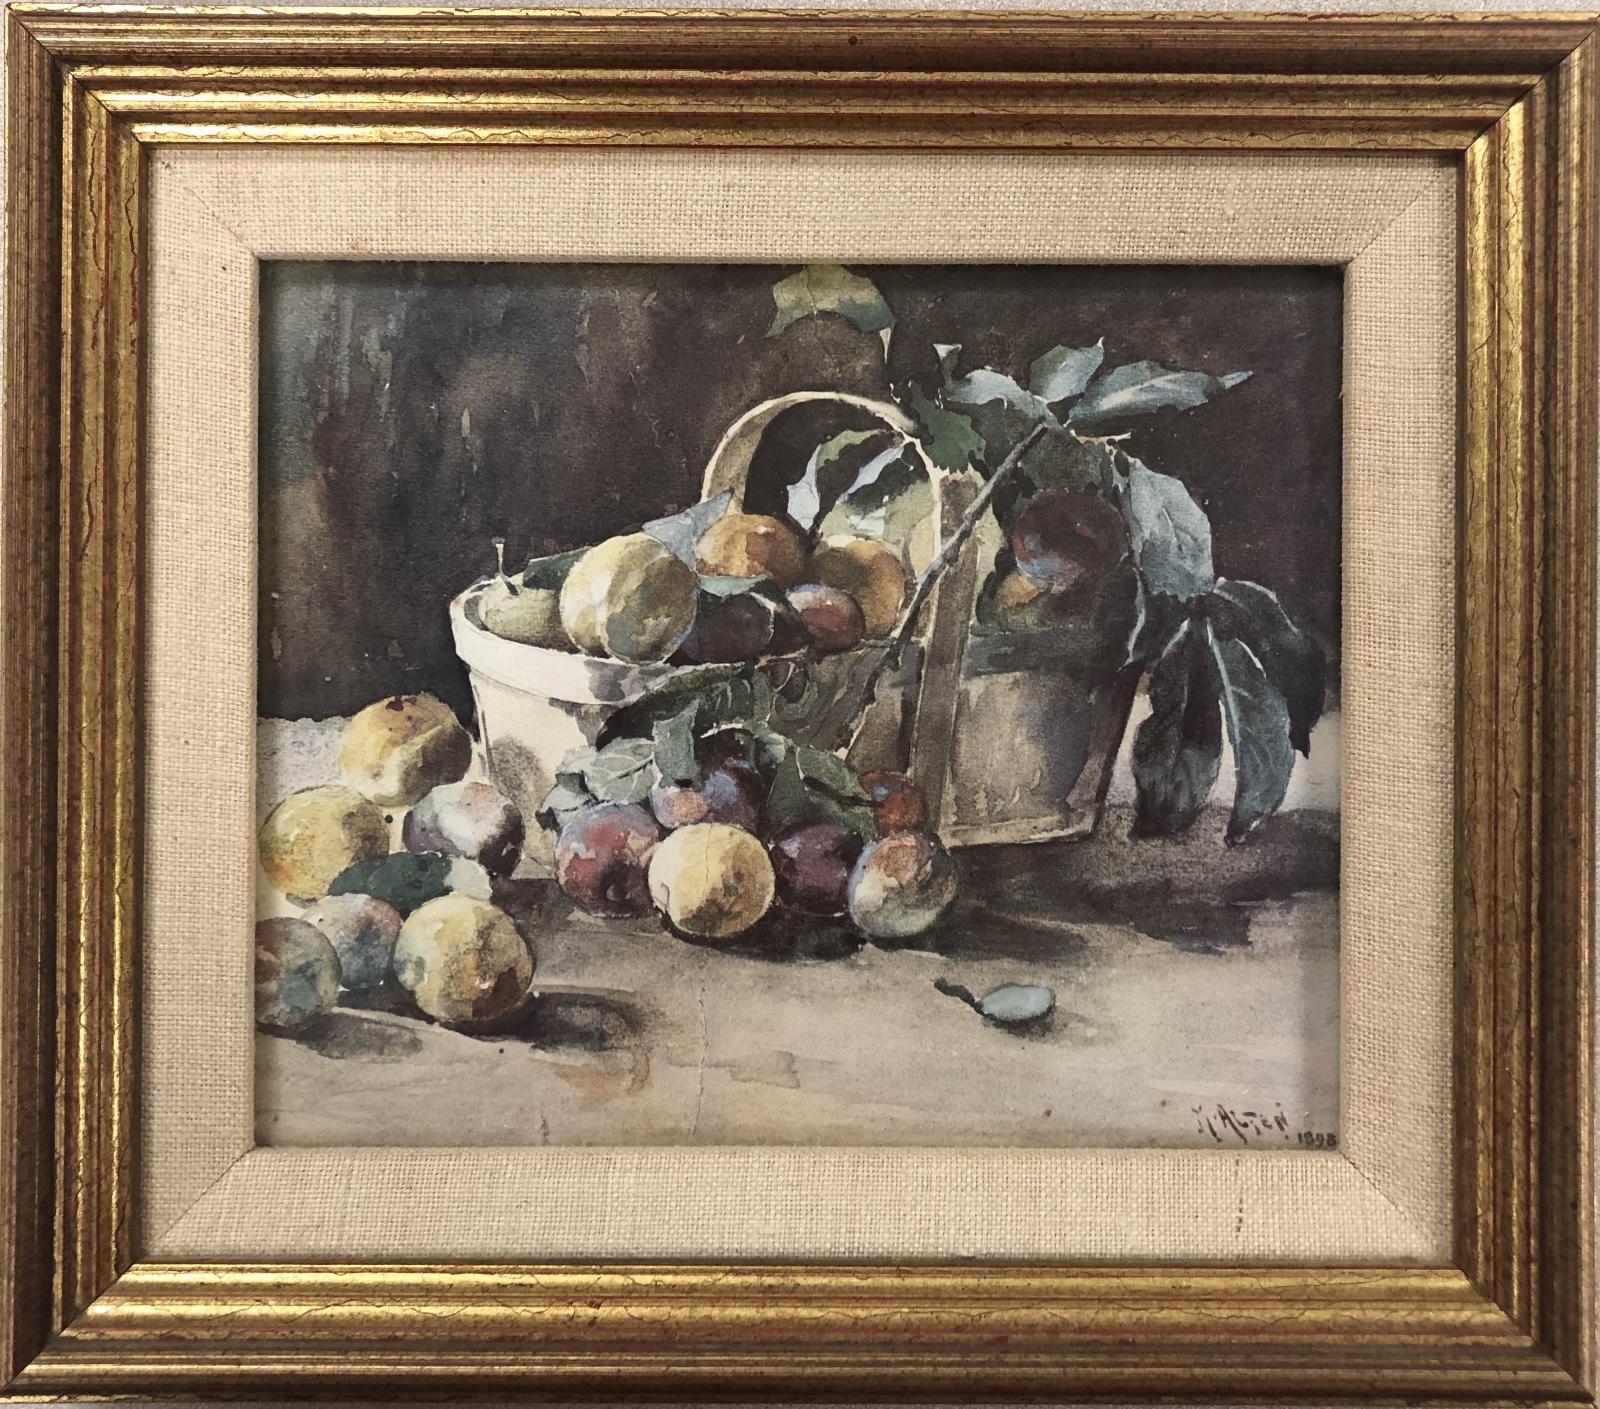 Reproduction of an image originally painted by Mathias Alten of a basket of fruit.